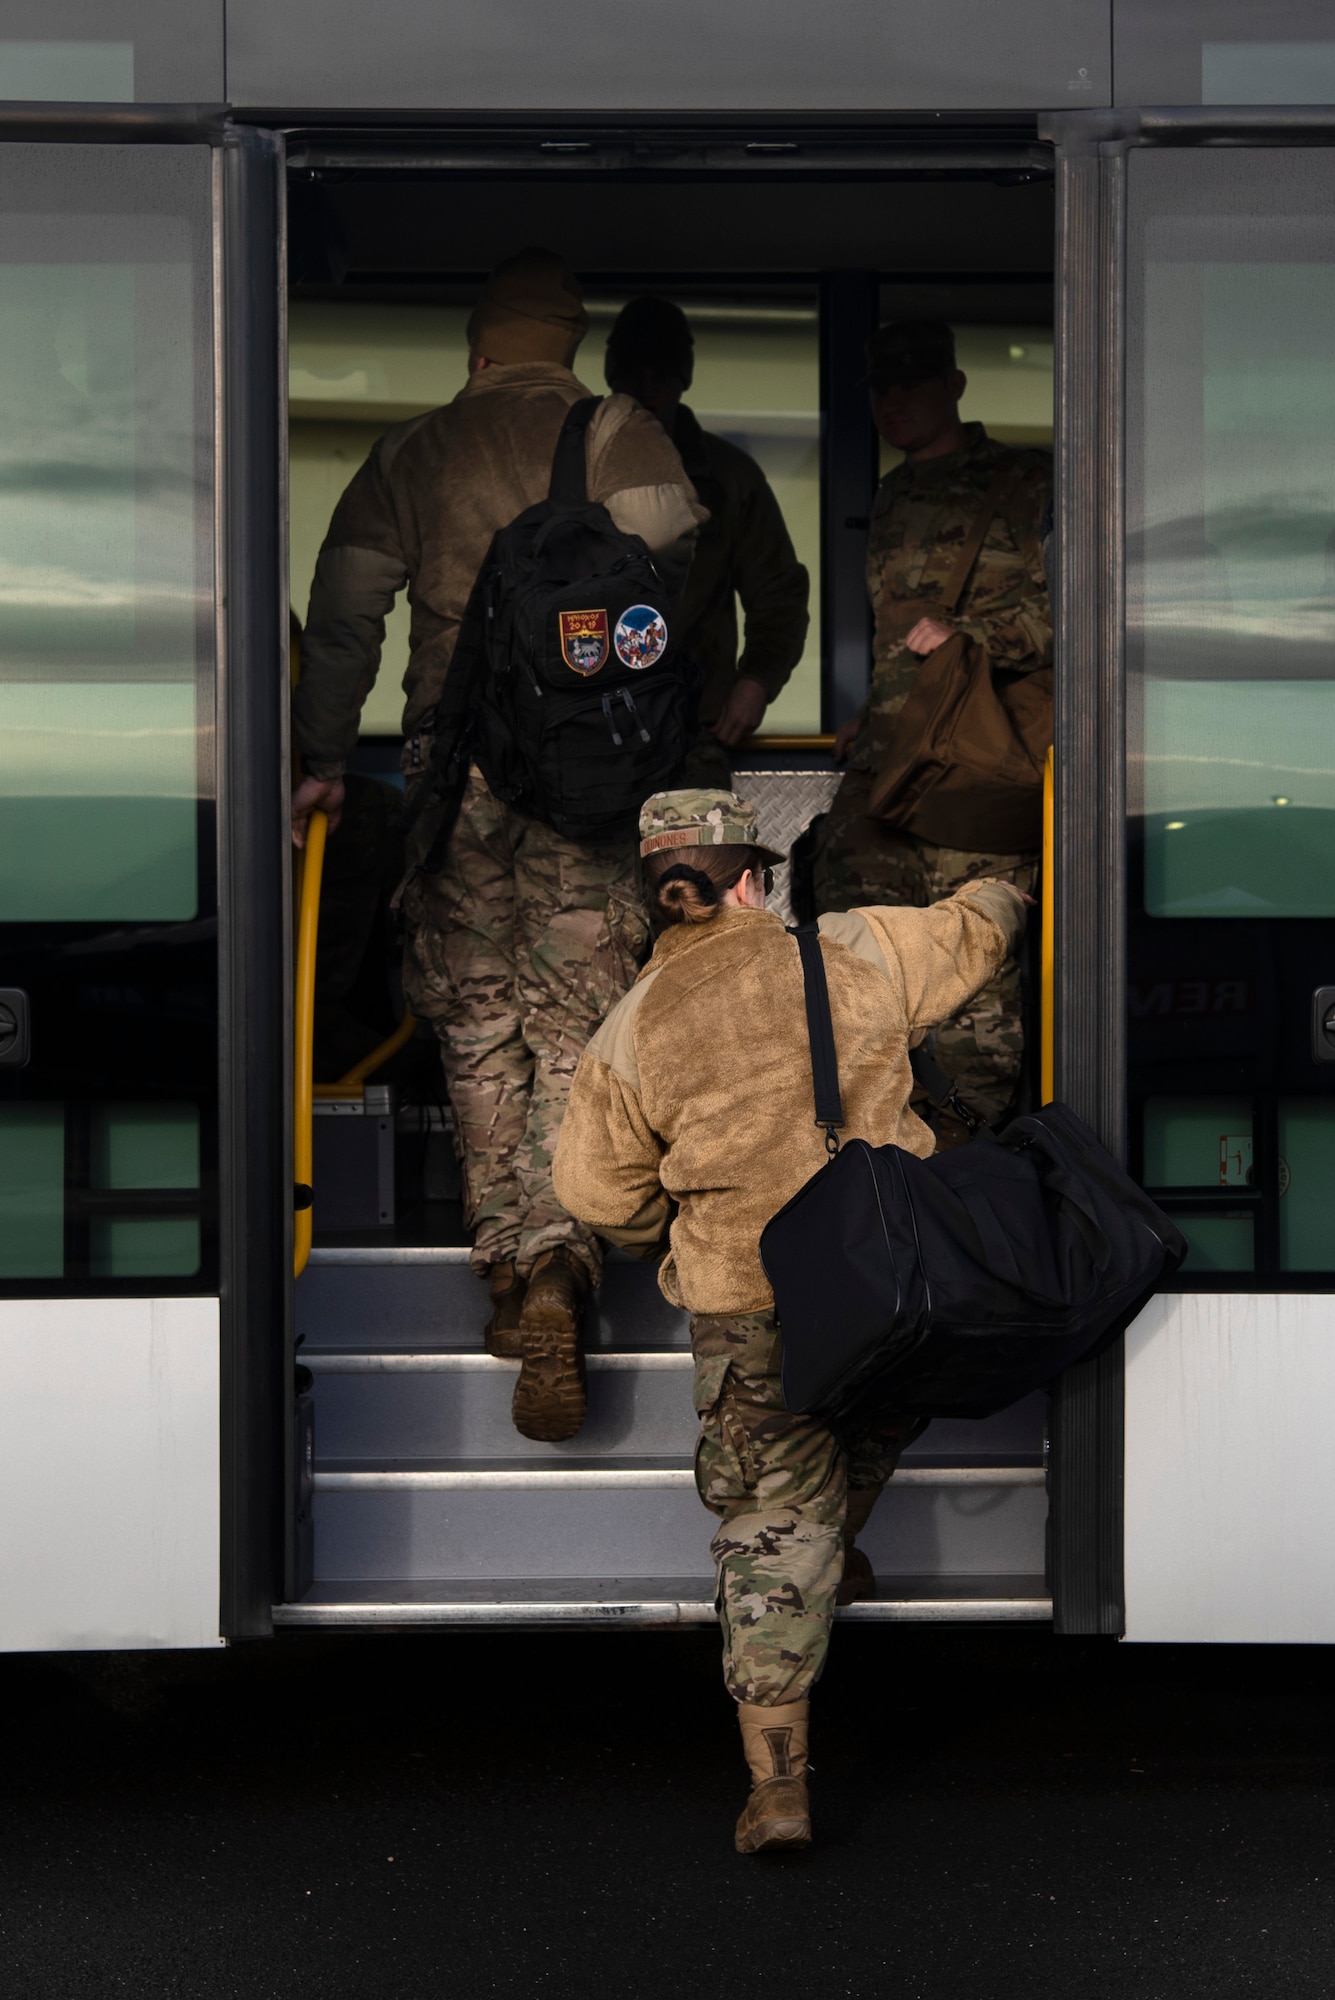 U.S. Air Force Airmen from the 52nd Fighter Wing board a bus during a simulated deployment at Spangdahlem Air Base, Germany, Dec. 17, 2019. The small team of Airmen conducted an Agile Combat Employment exercise on the Spangdahlem flightline in an effort to deter potential threats. Deployments and exercises demonstrate the U.S. military's contribution to regional security and reassure allies. (U.S. Air Force photo by Airman 1st Class Valerie Seelye)